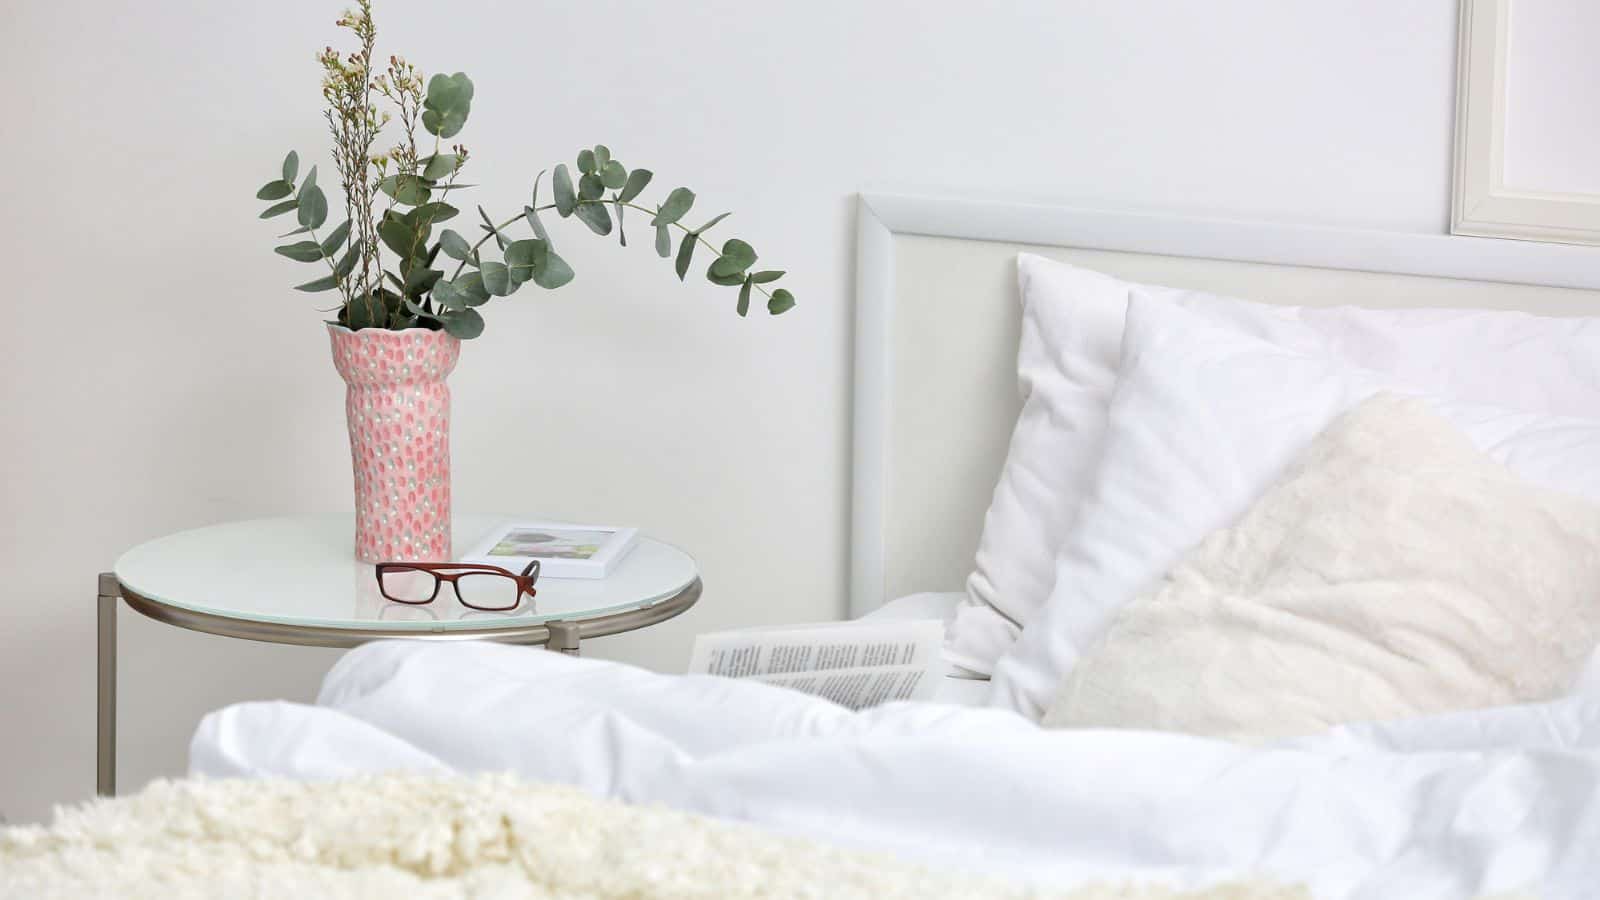 vase and glasses on a nightstand next to a bed